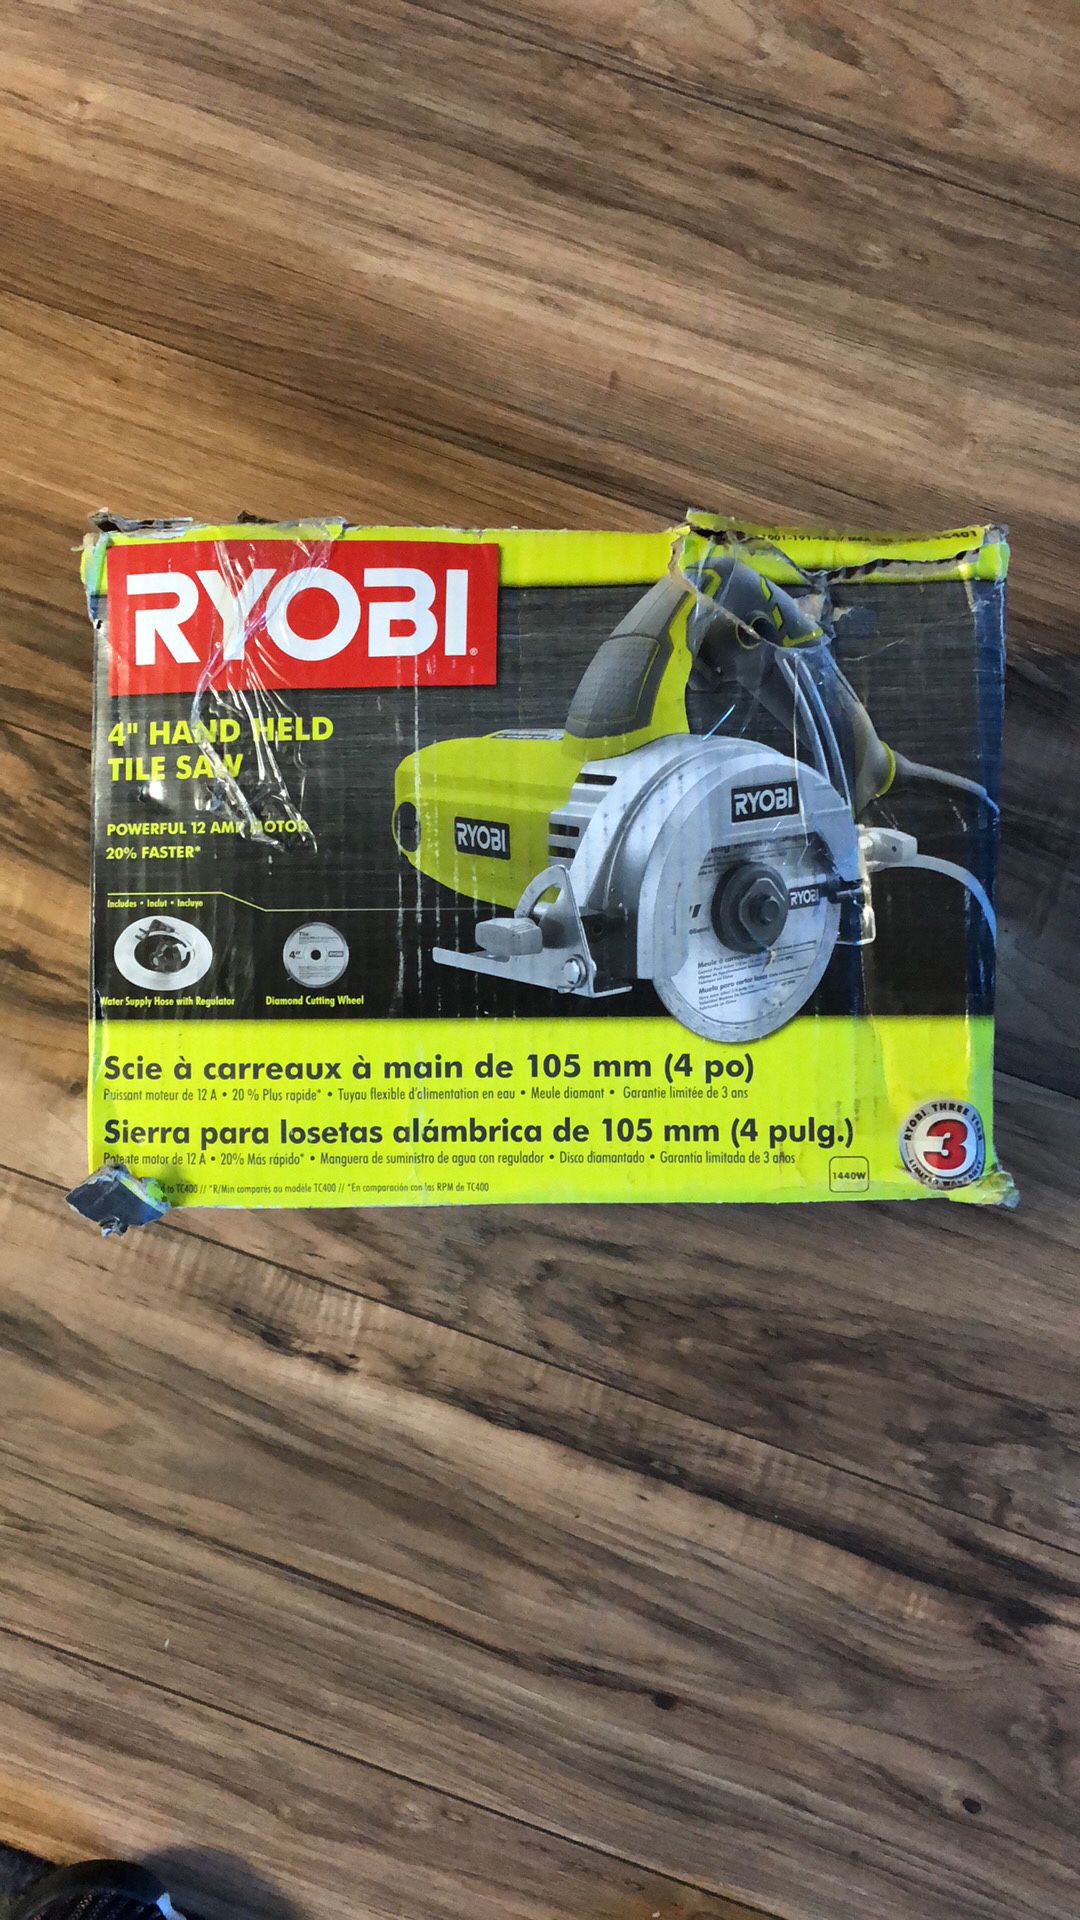 RYOBI 4 in. Tile Saw 💥 check my list of publications💥